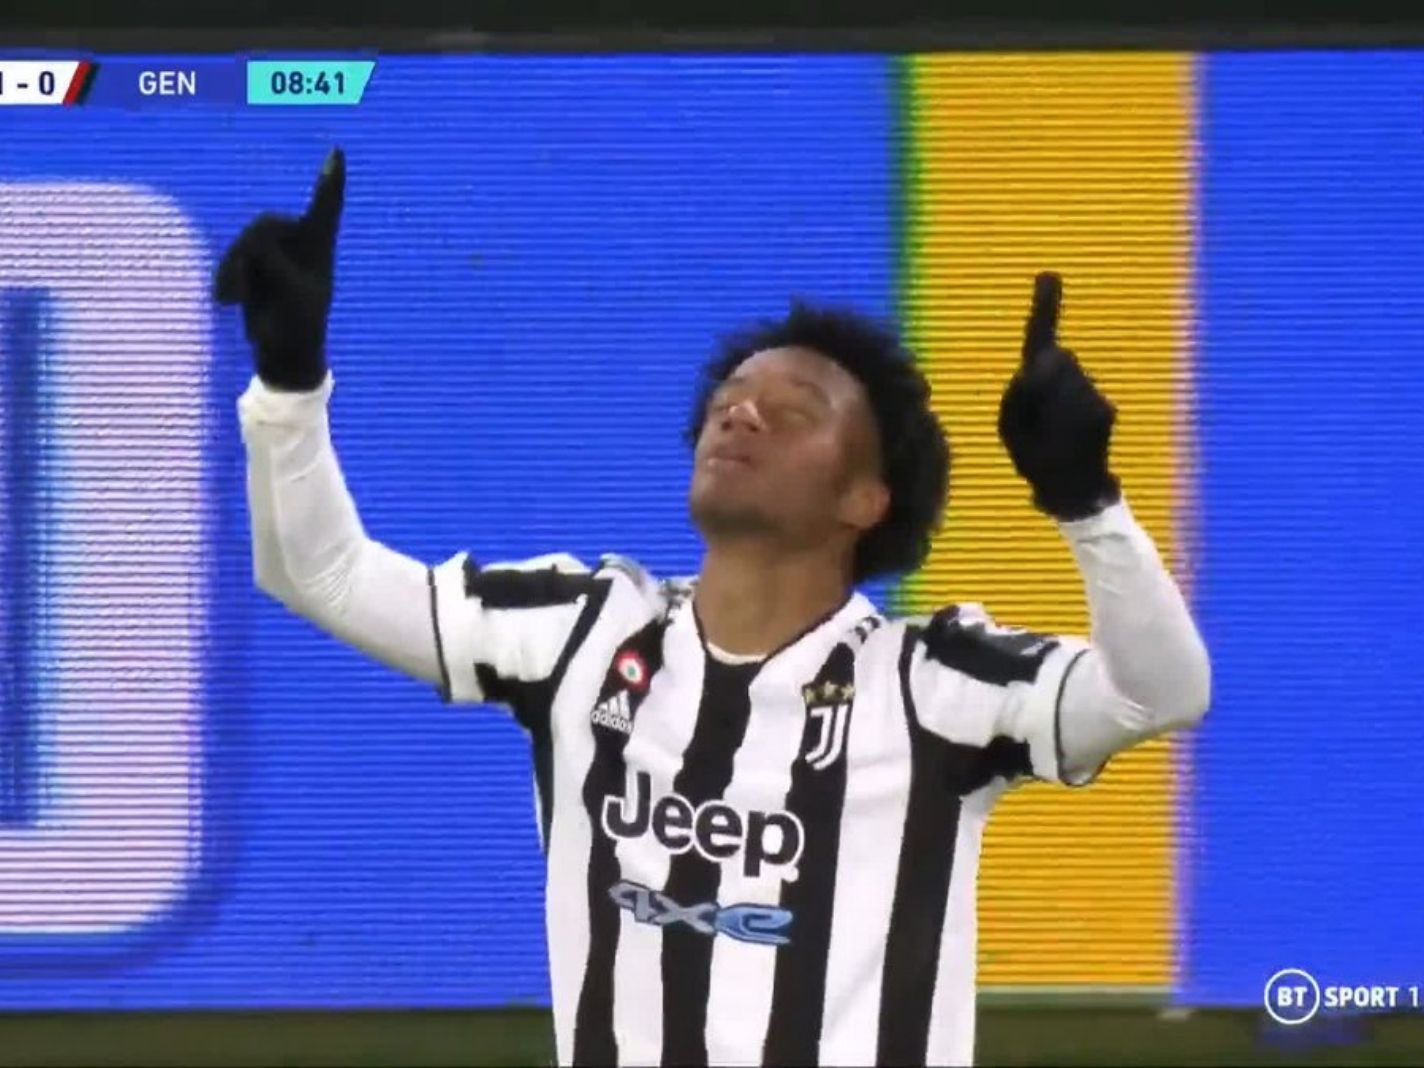 Juan Cuadrado celebrates after scoring a goal directly from a corner against Genoa